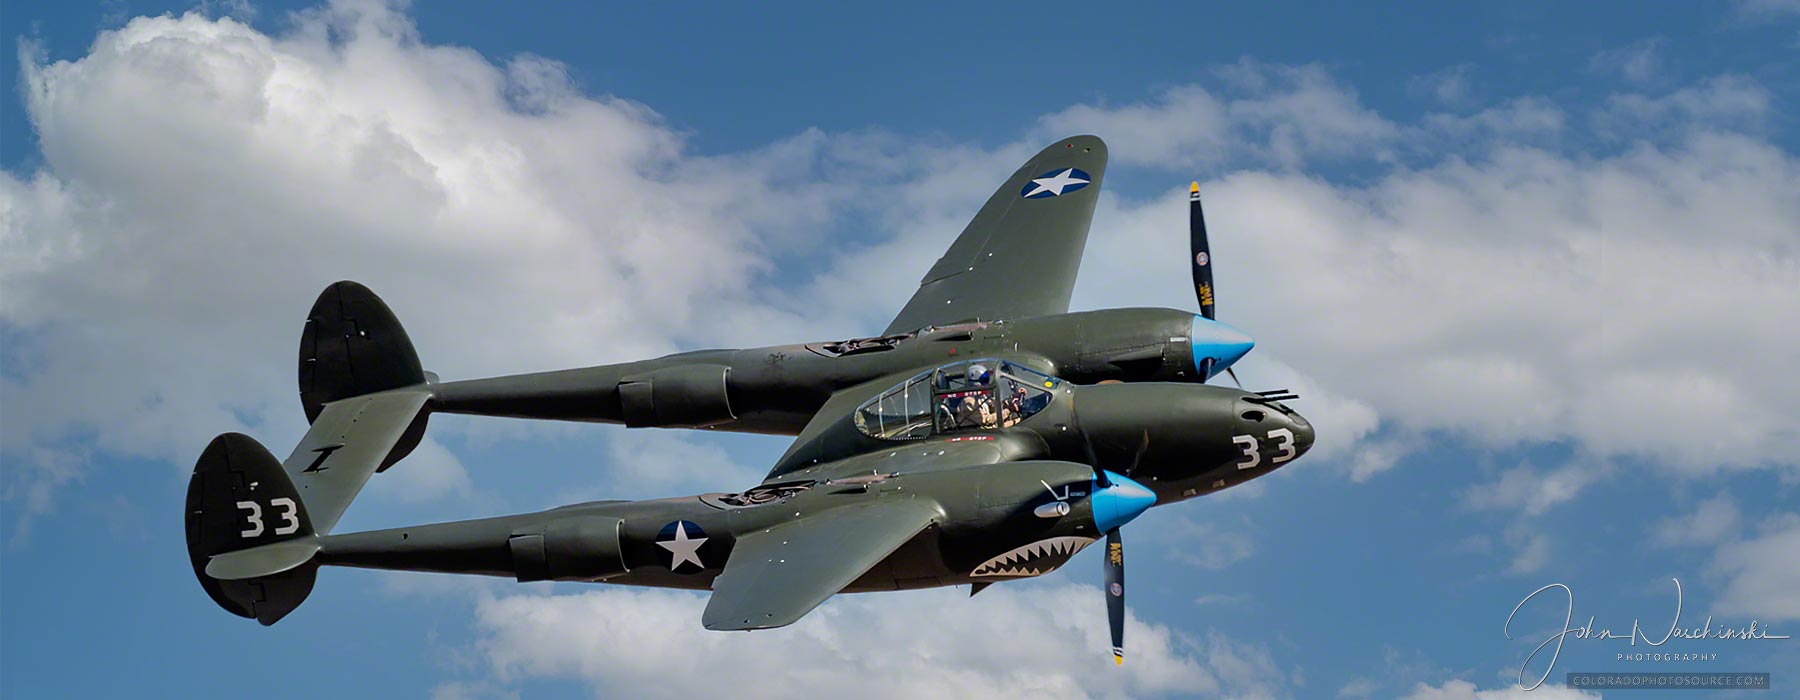 Photos of The Lockheed P-38 Lightning 1942 WWII Fighter Aircraft